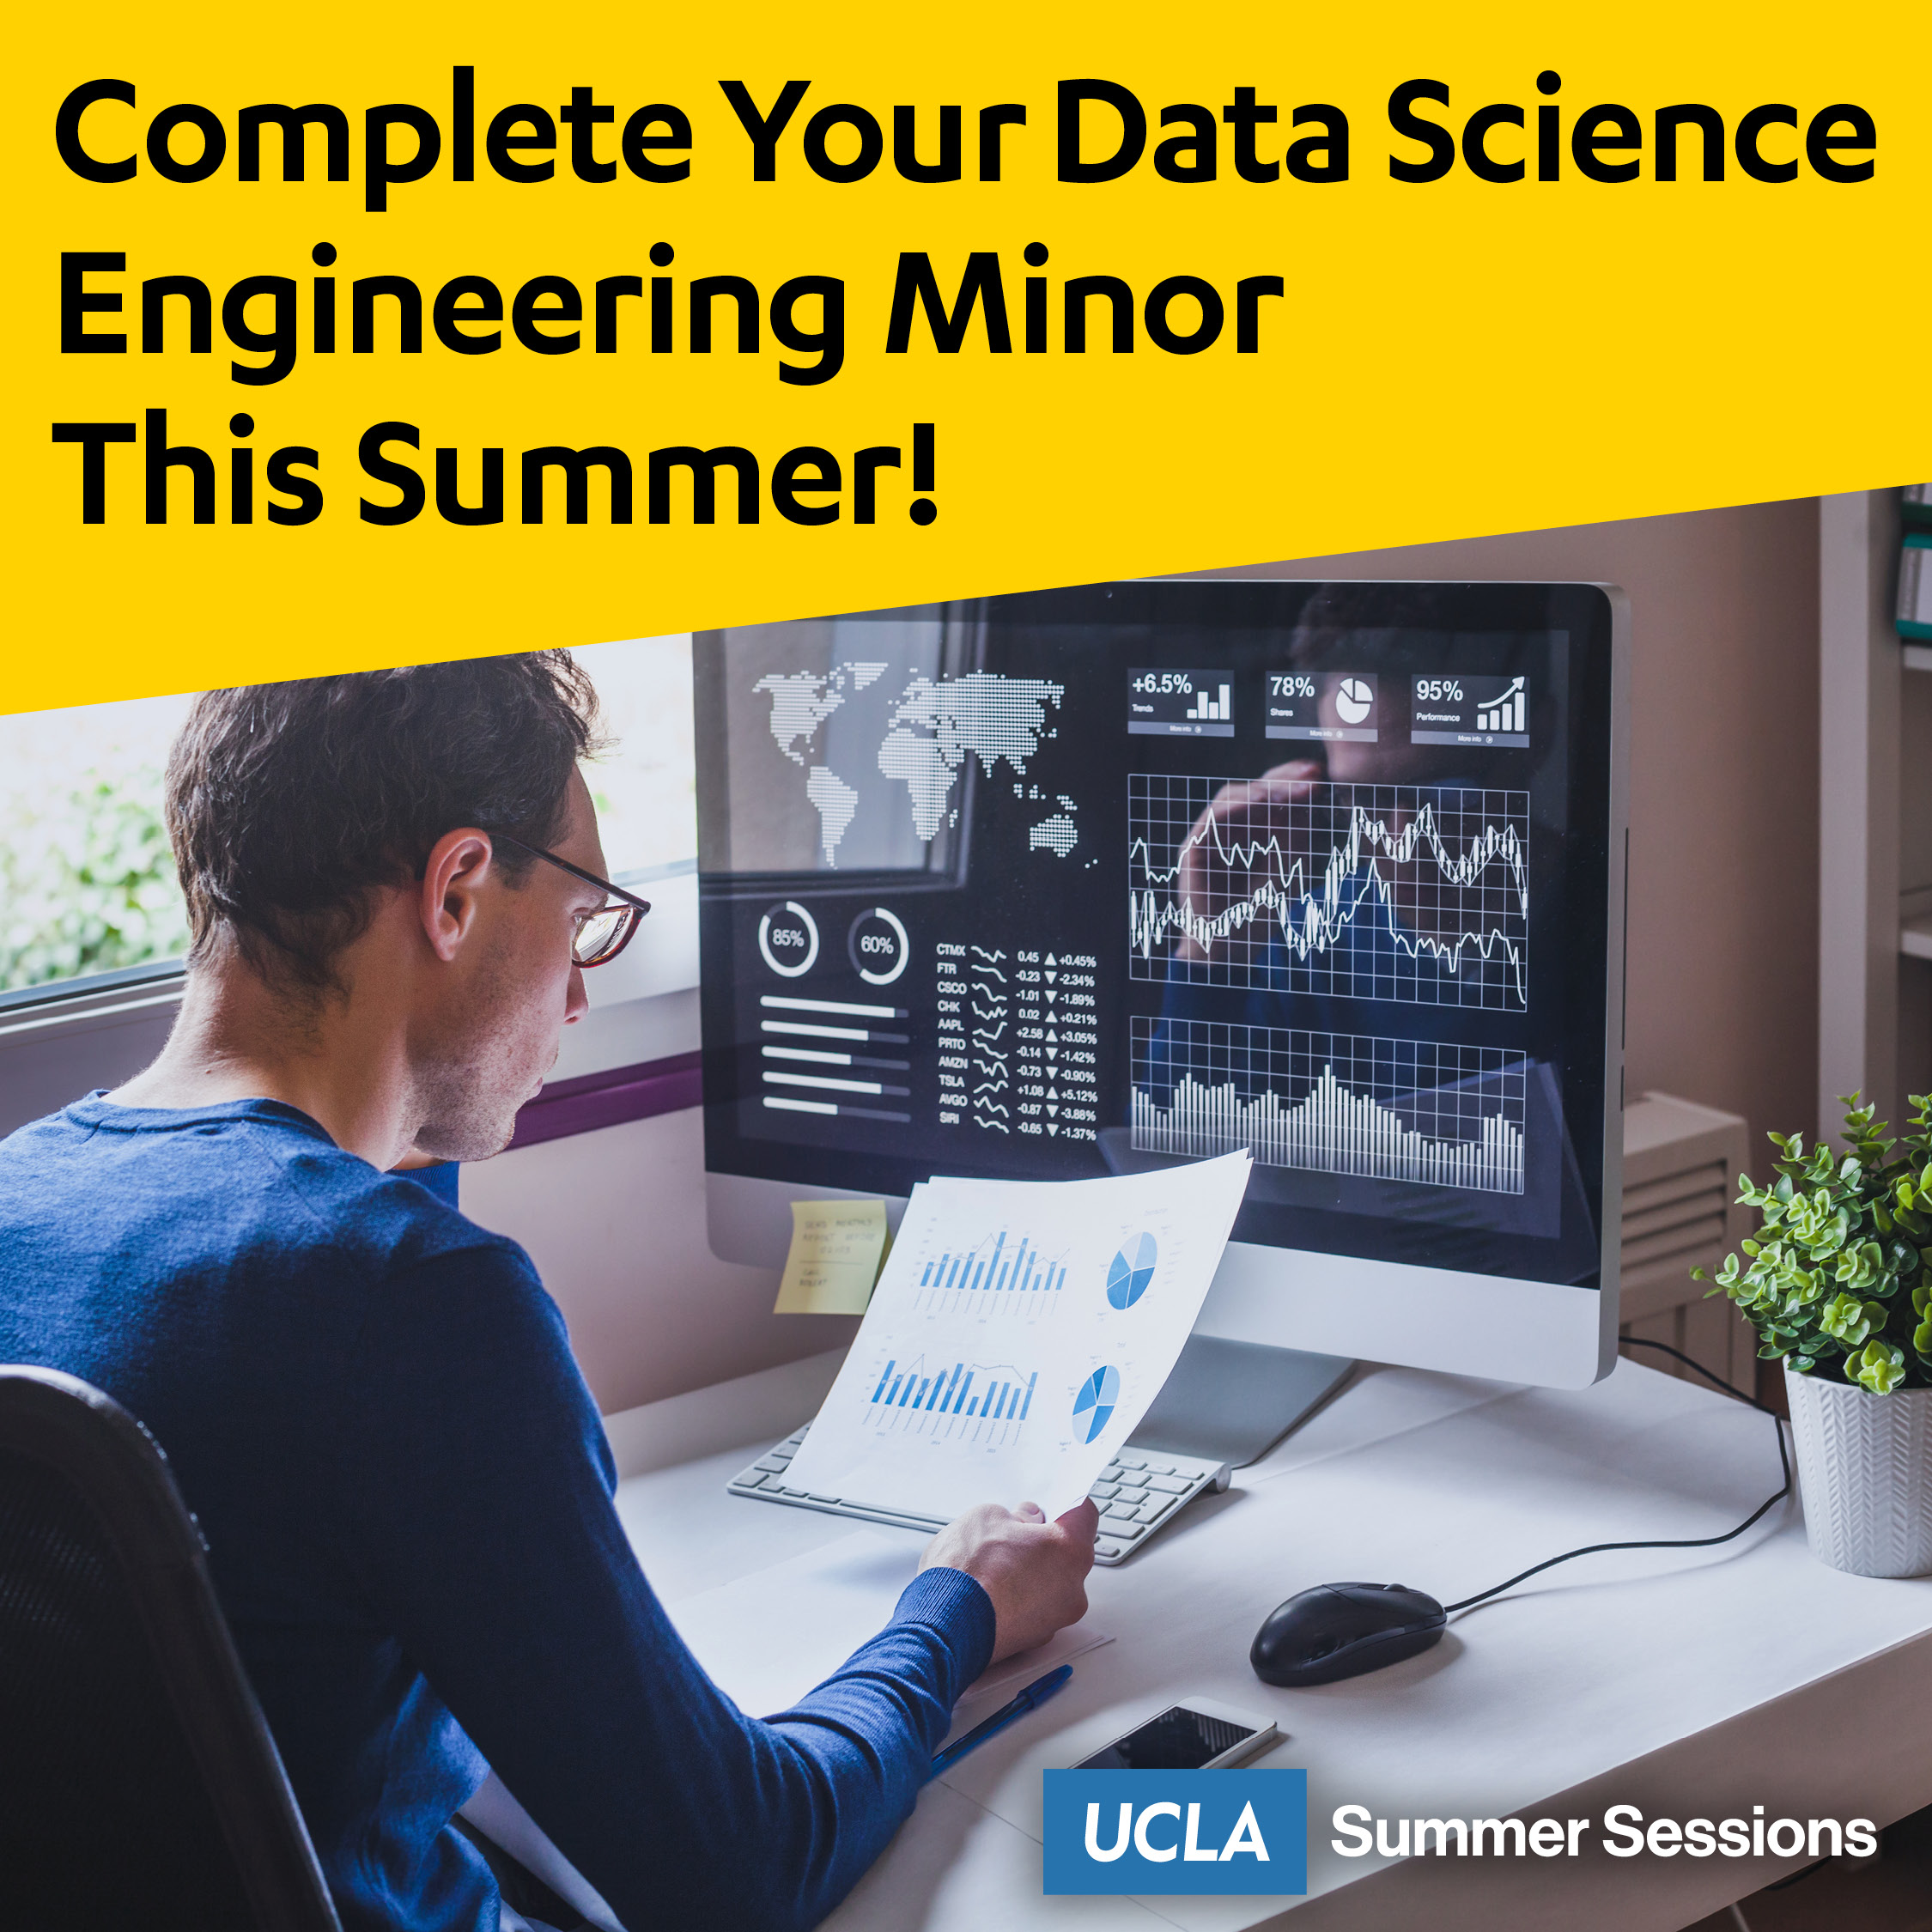 UCLA Summer Sessions on Twitter: "Want to graduate with a Data